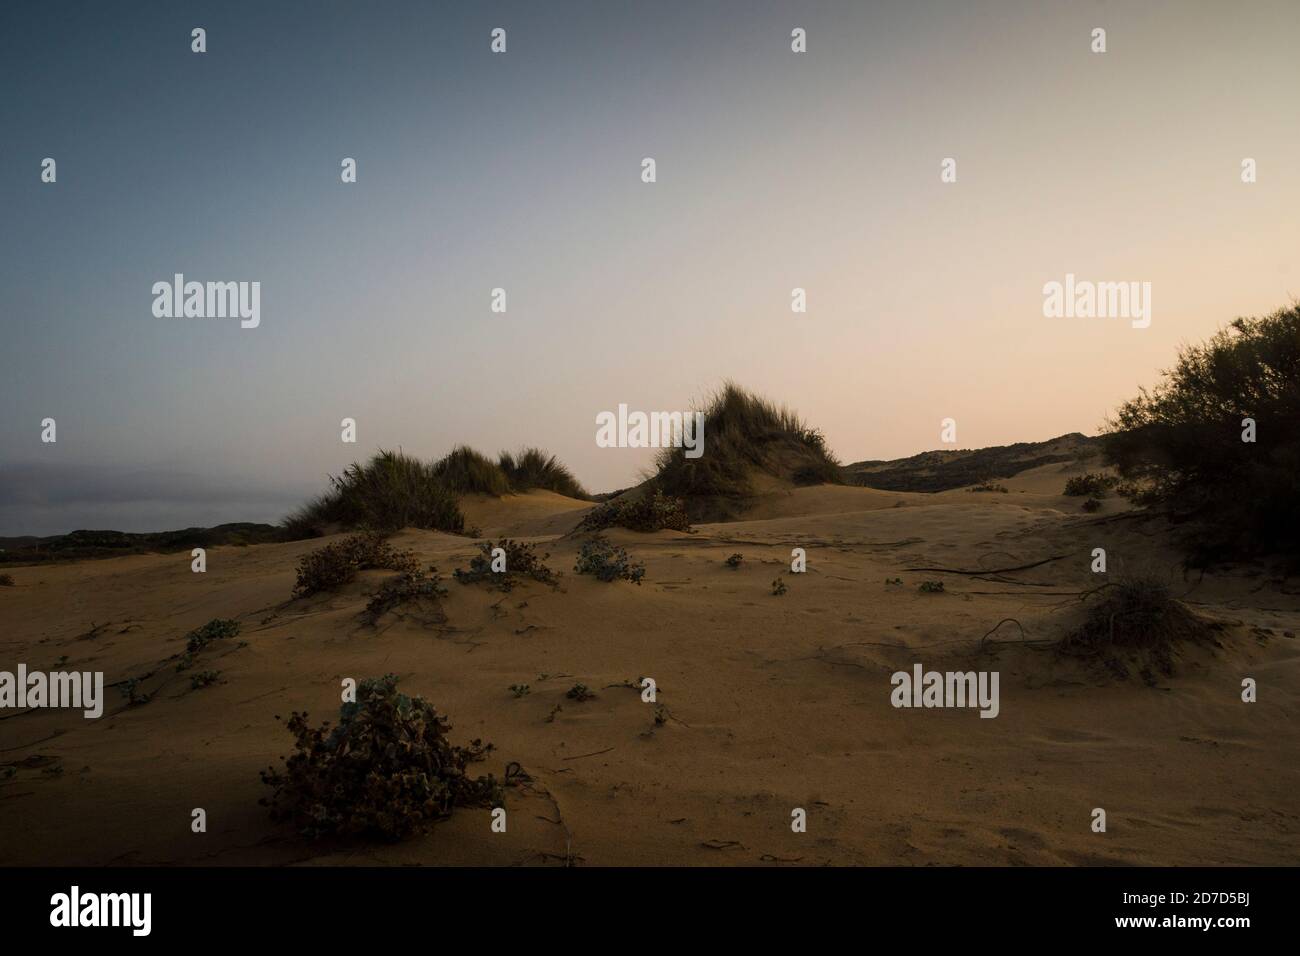 Vast dune landscape at sunrise extending to the hills on the horizon line, with footprints on the sand and dune bushes Stock Photo